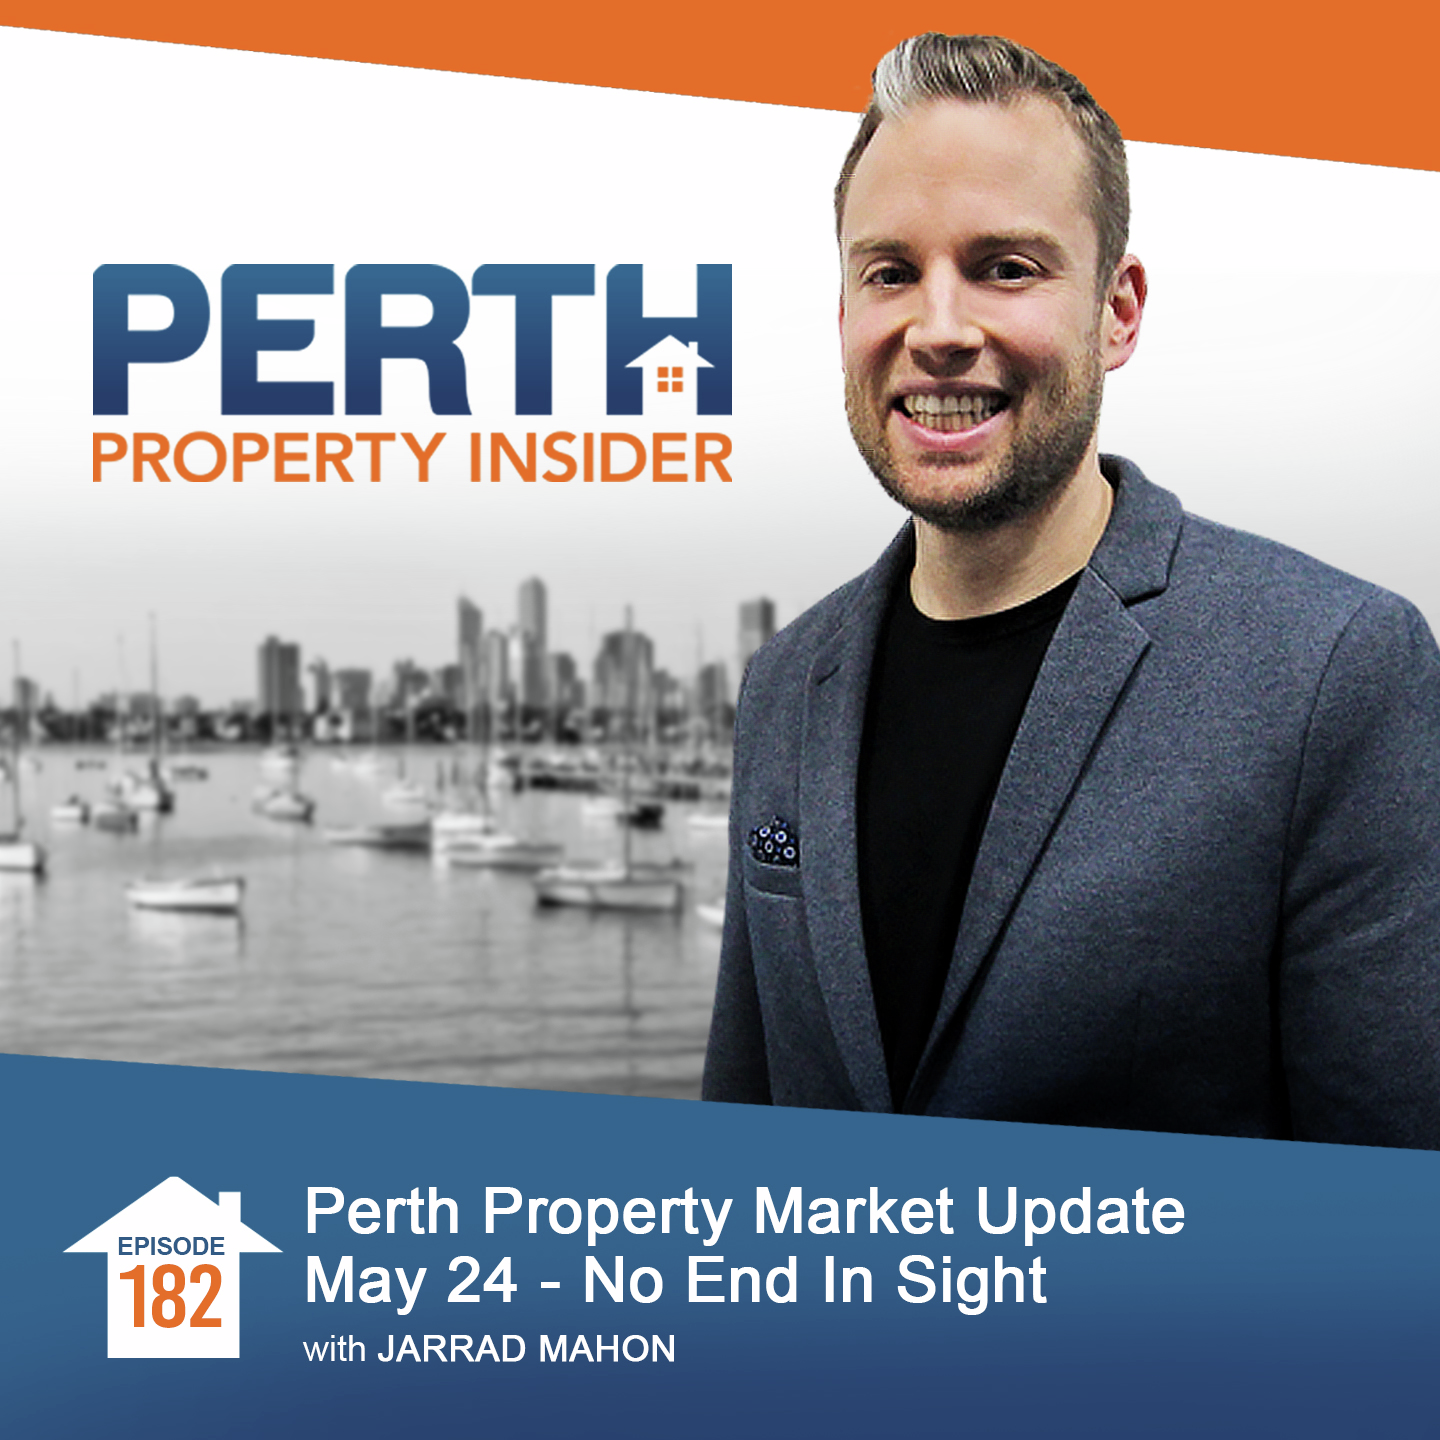 Perth Property Market Update May 24 - No End In Sight